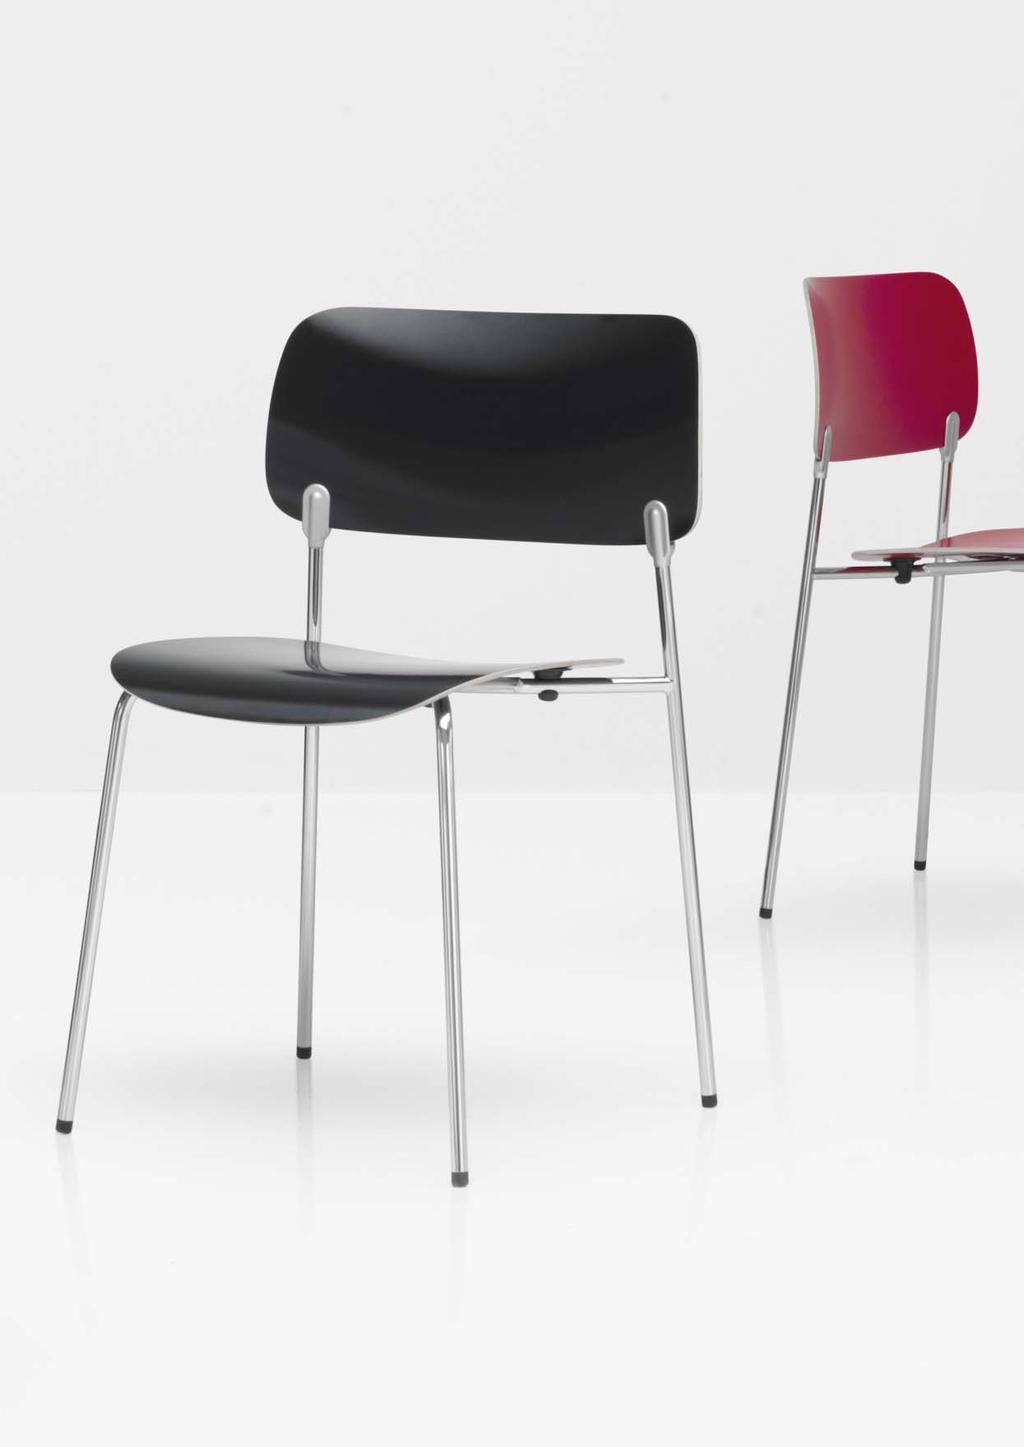 SPOT DESIGN ANTTI KOTILAINEN SPOT represents a new generation of the successful CHIP chair. The extreme lightness and the design is pure minimalistic.